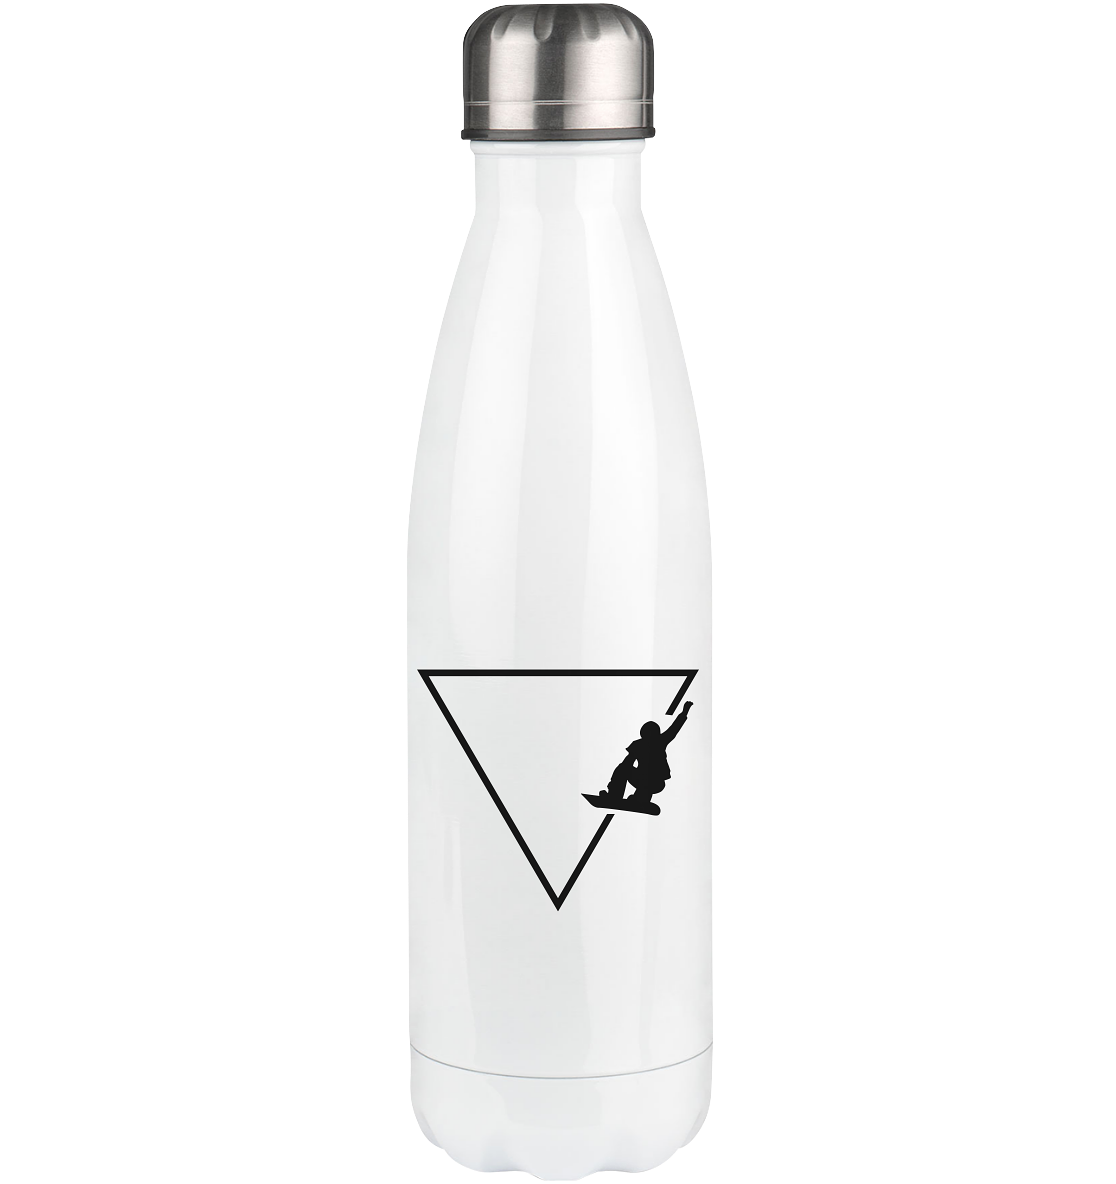 Triangle 1 and Snowboarding - Edelstahl Thermosflasche snowboarden 500ml